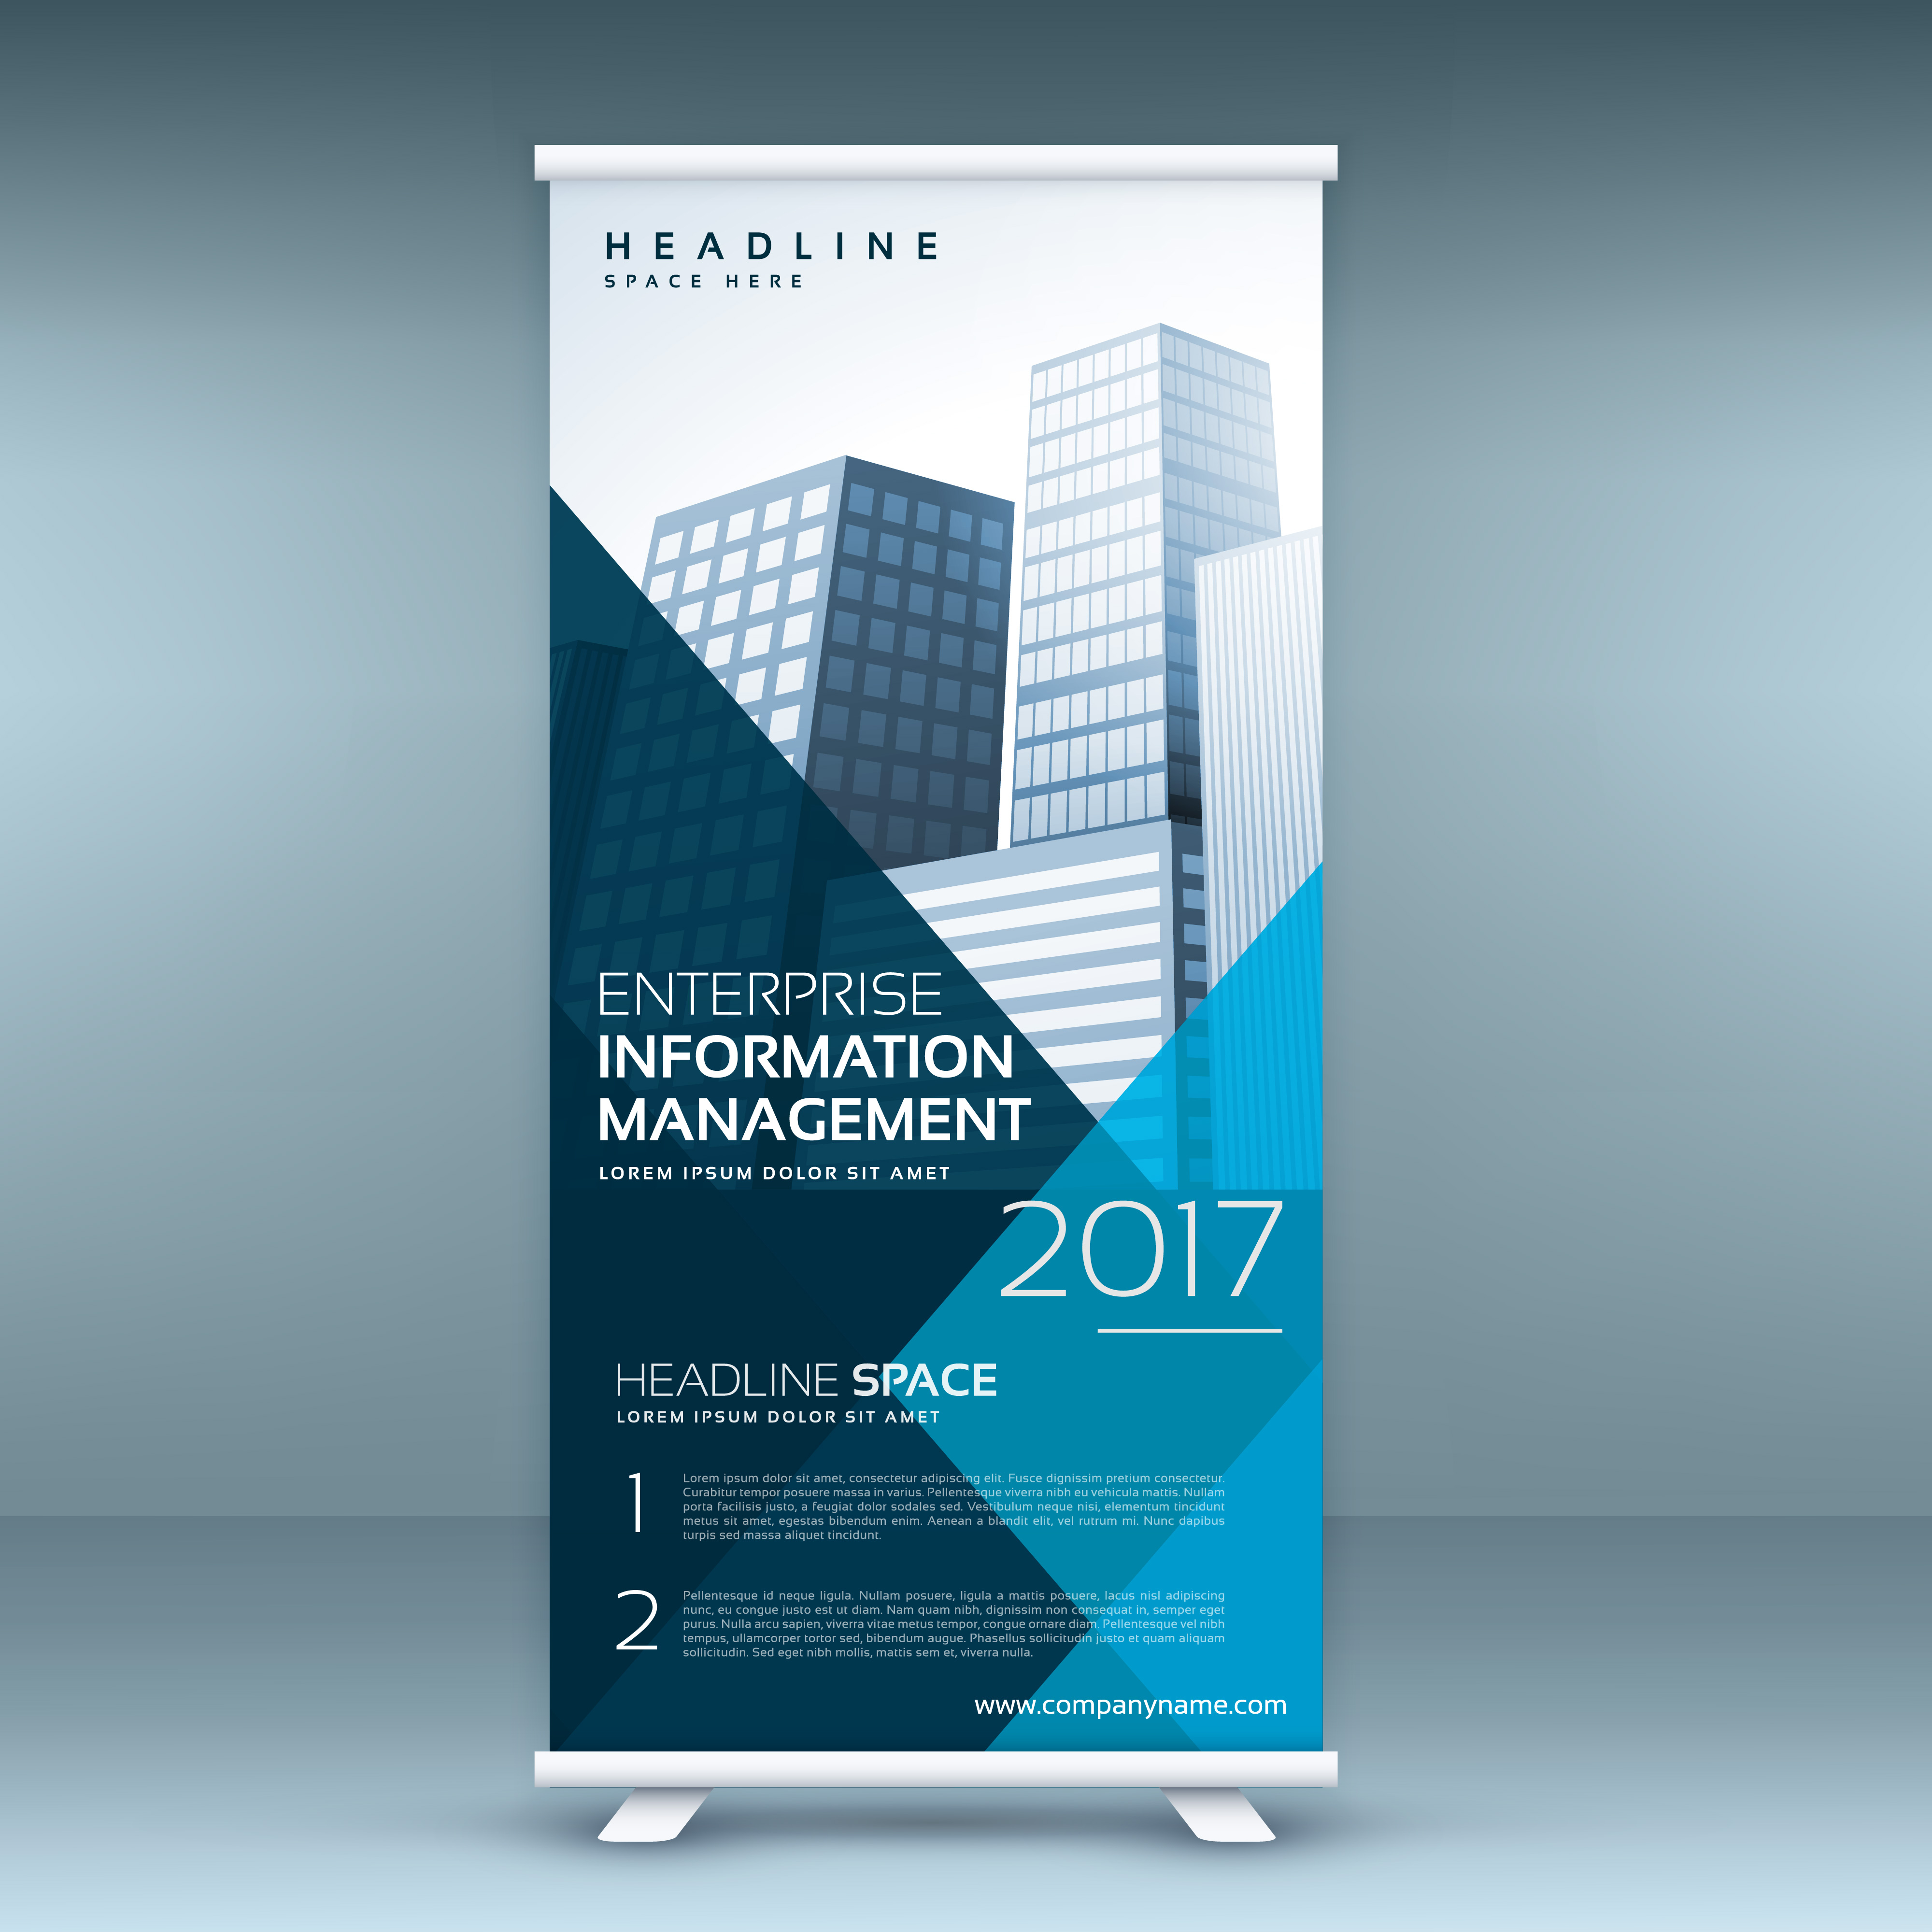 Download blue roll up display banner mockup template - Download Free Vector Art, Stock Graphics & Images